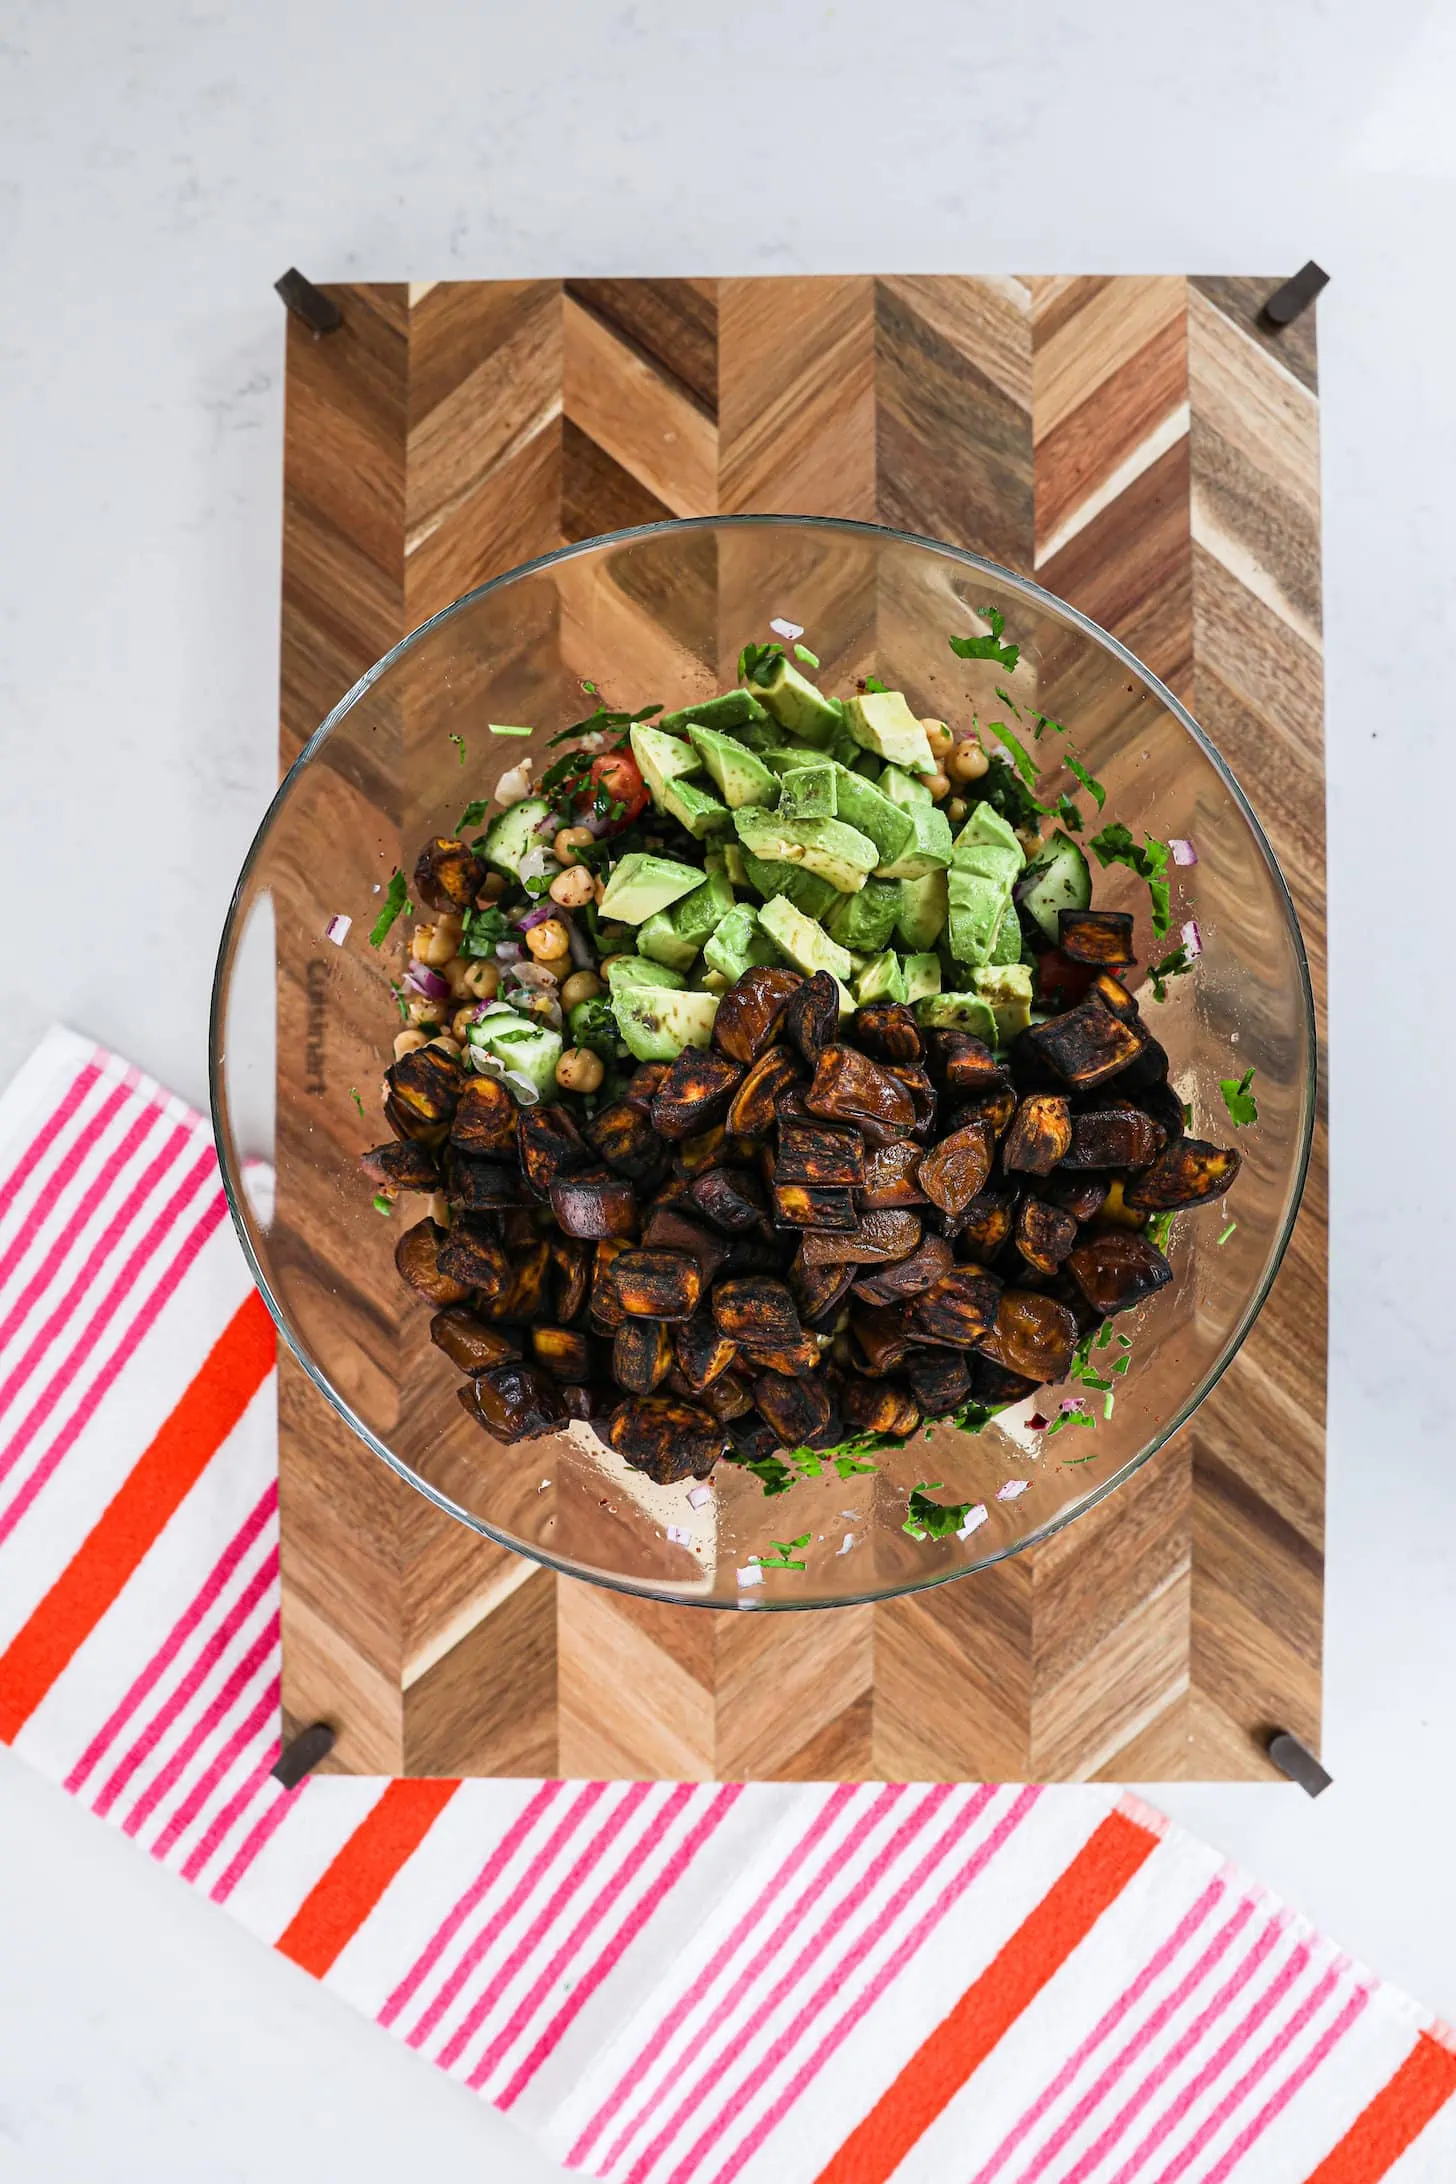 a bowl of brown cubes and avocado chunks on a wooden board.